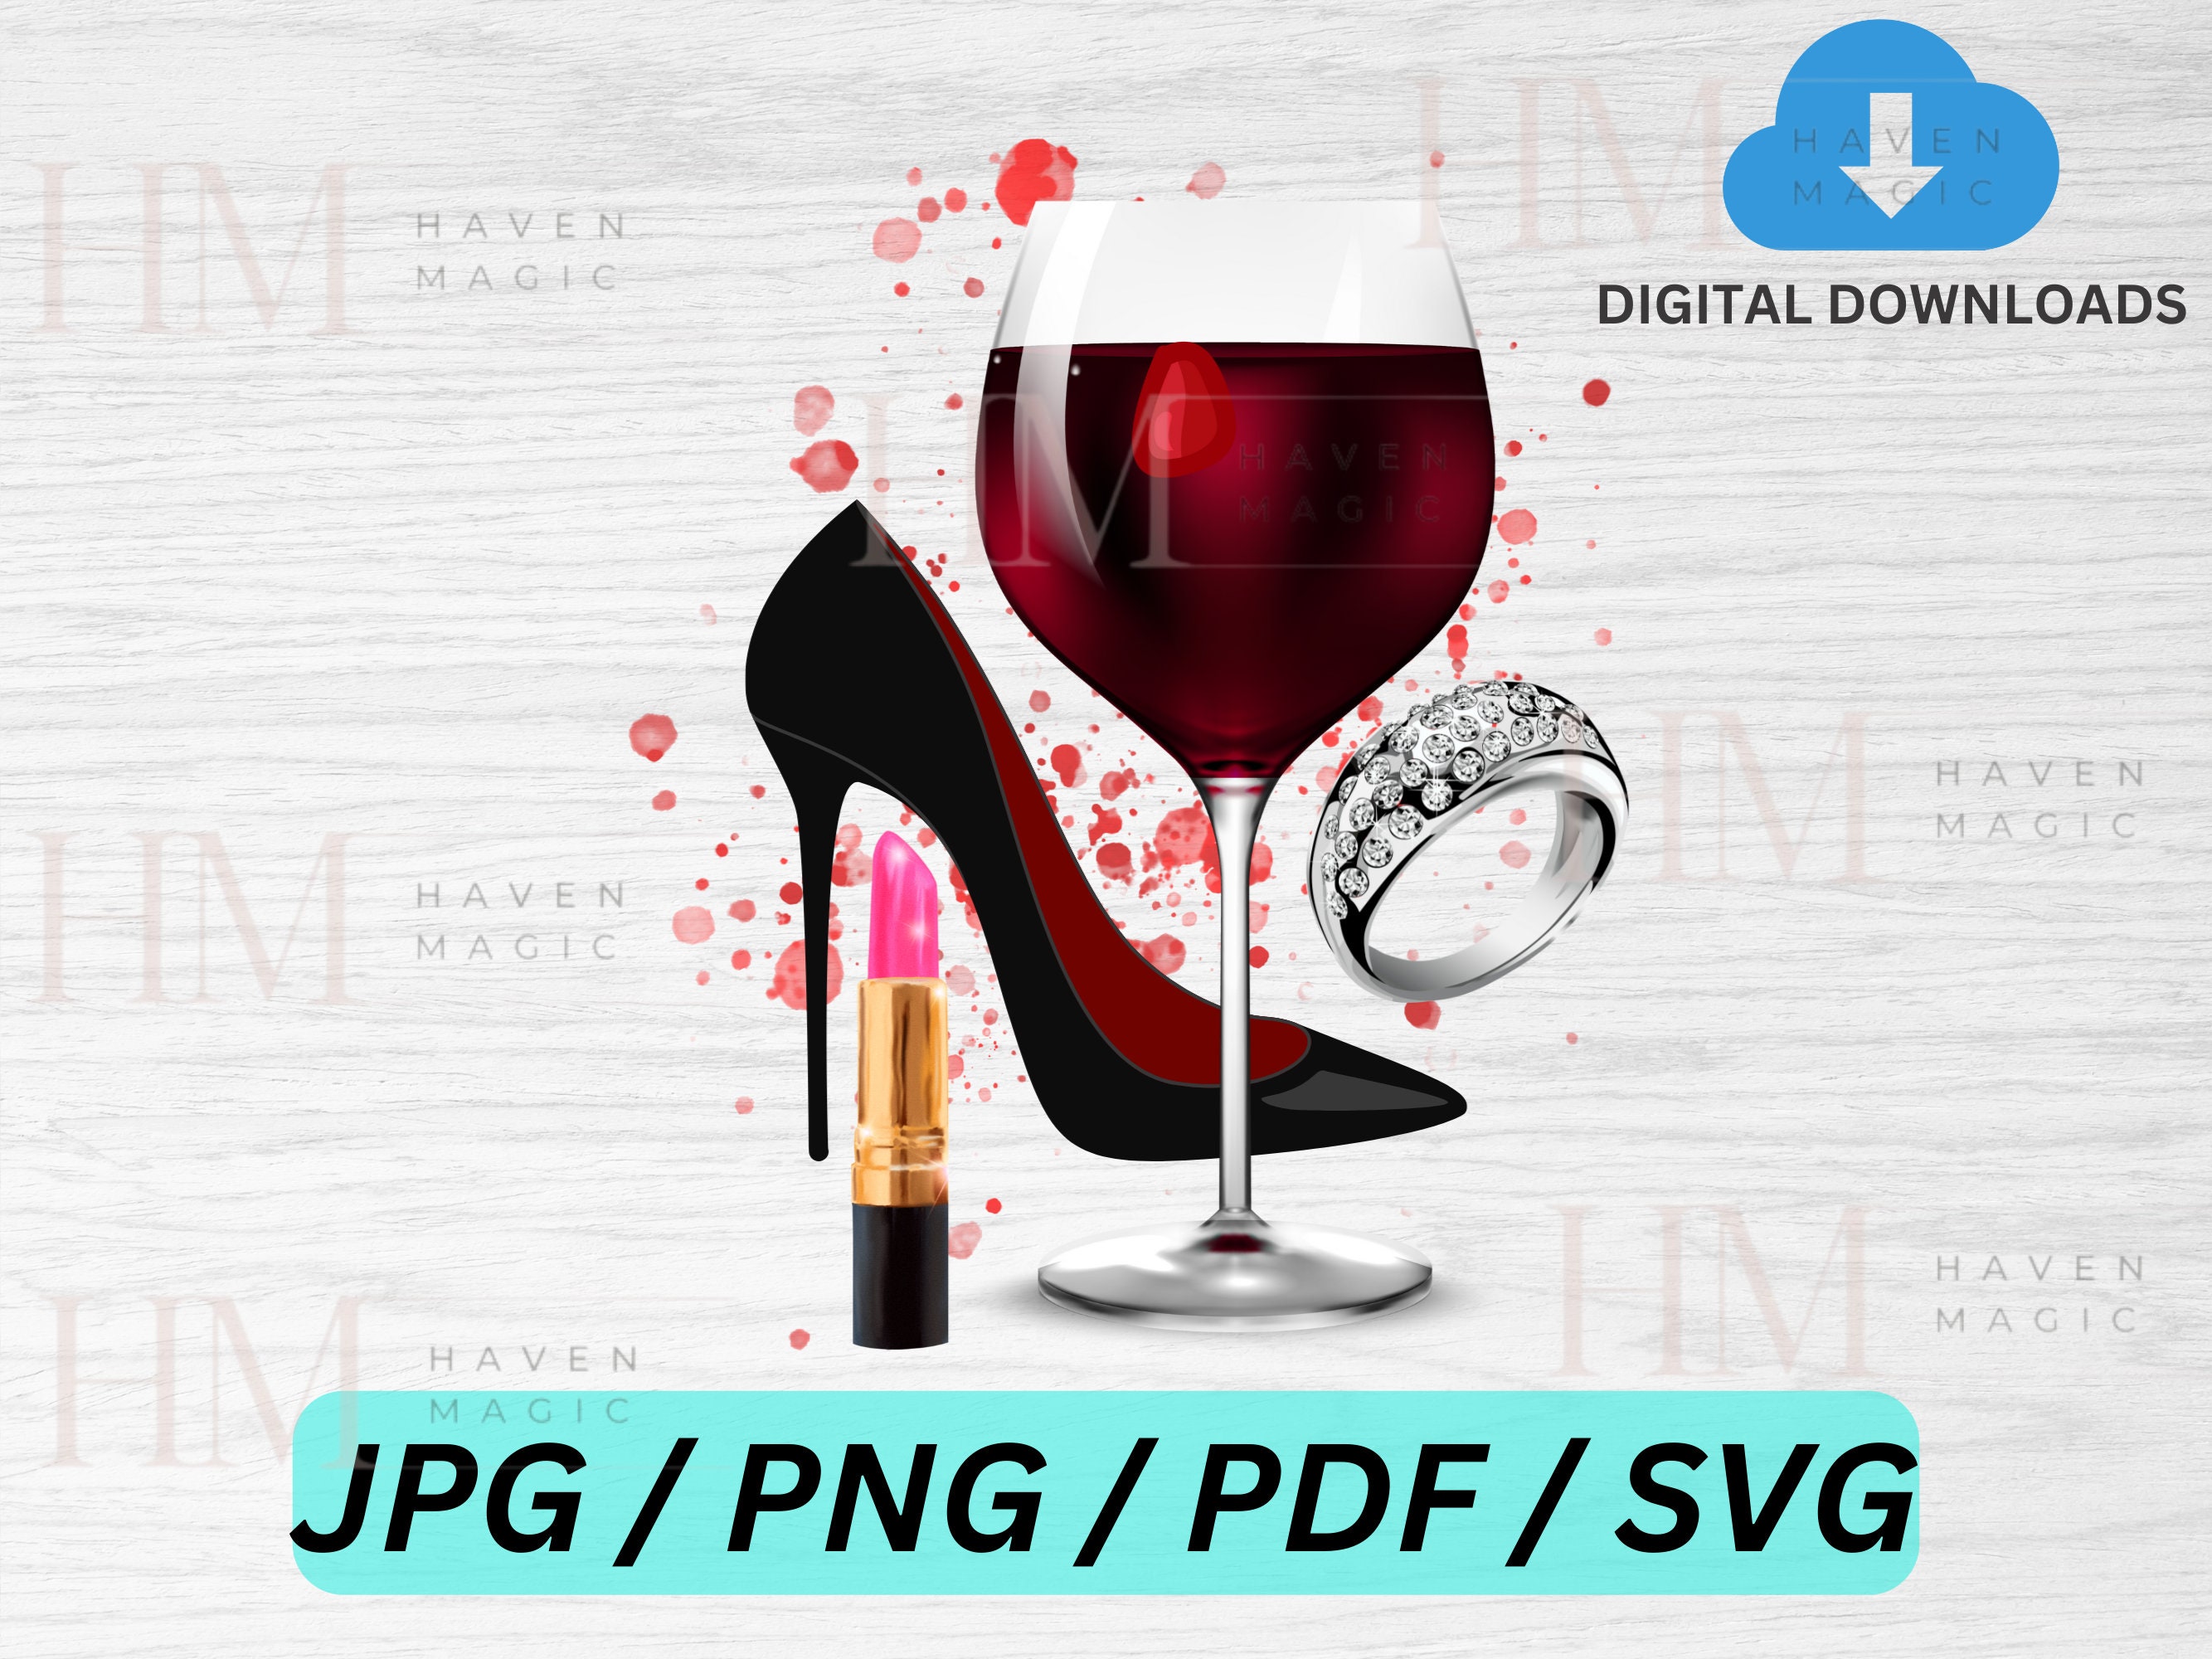 Stylish Black High Heels Clipart Graphic by VD Designs · Creative